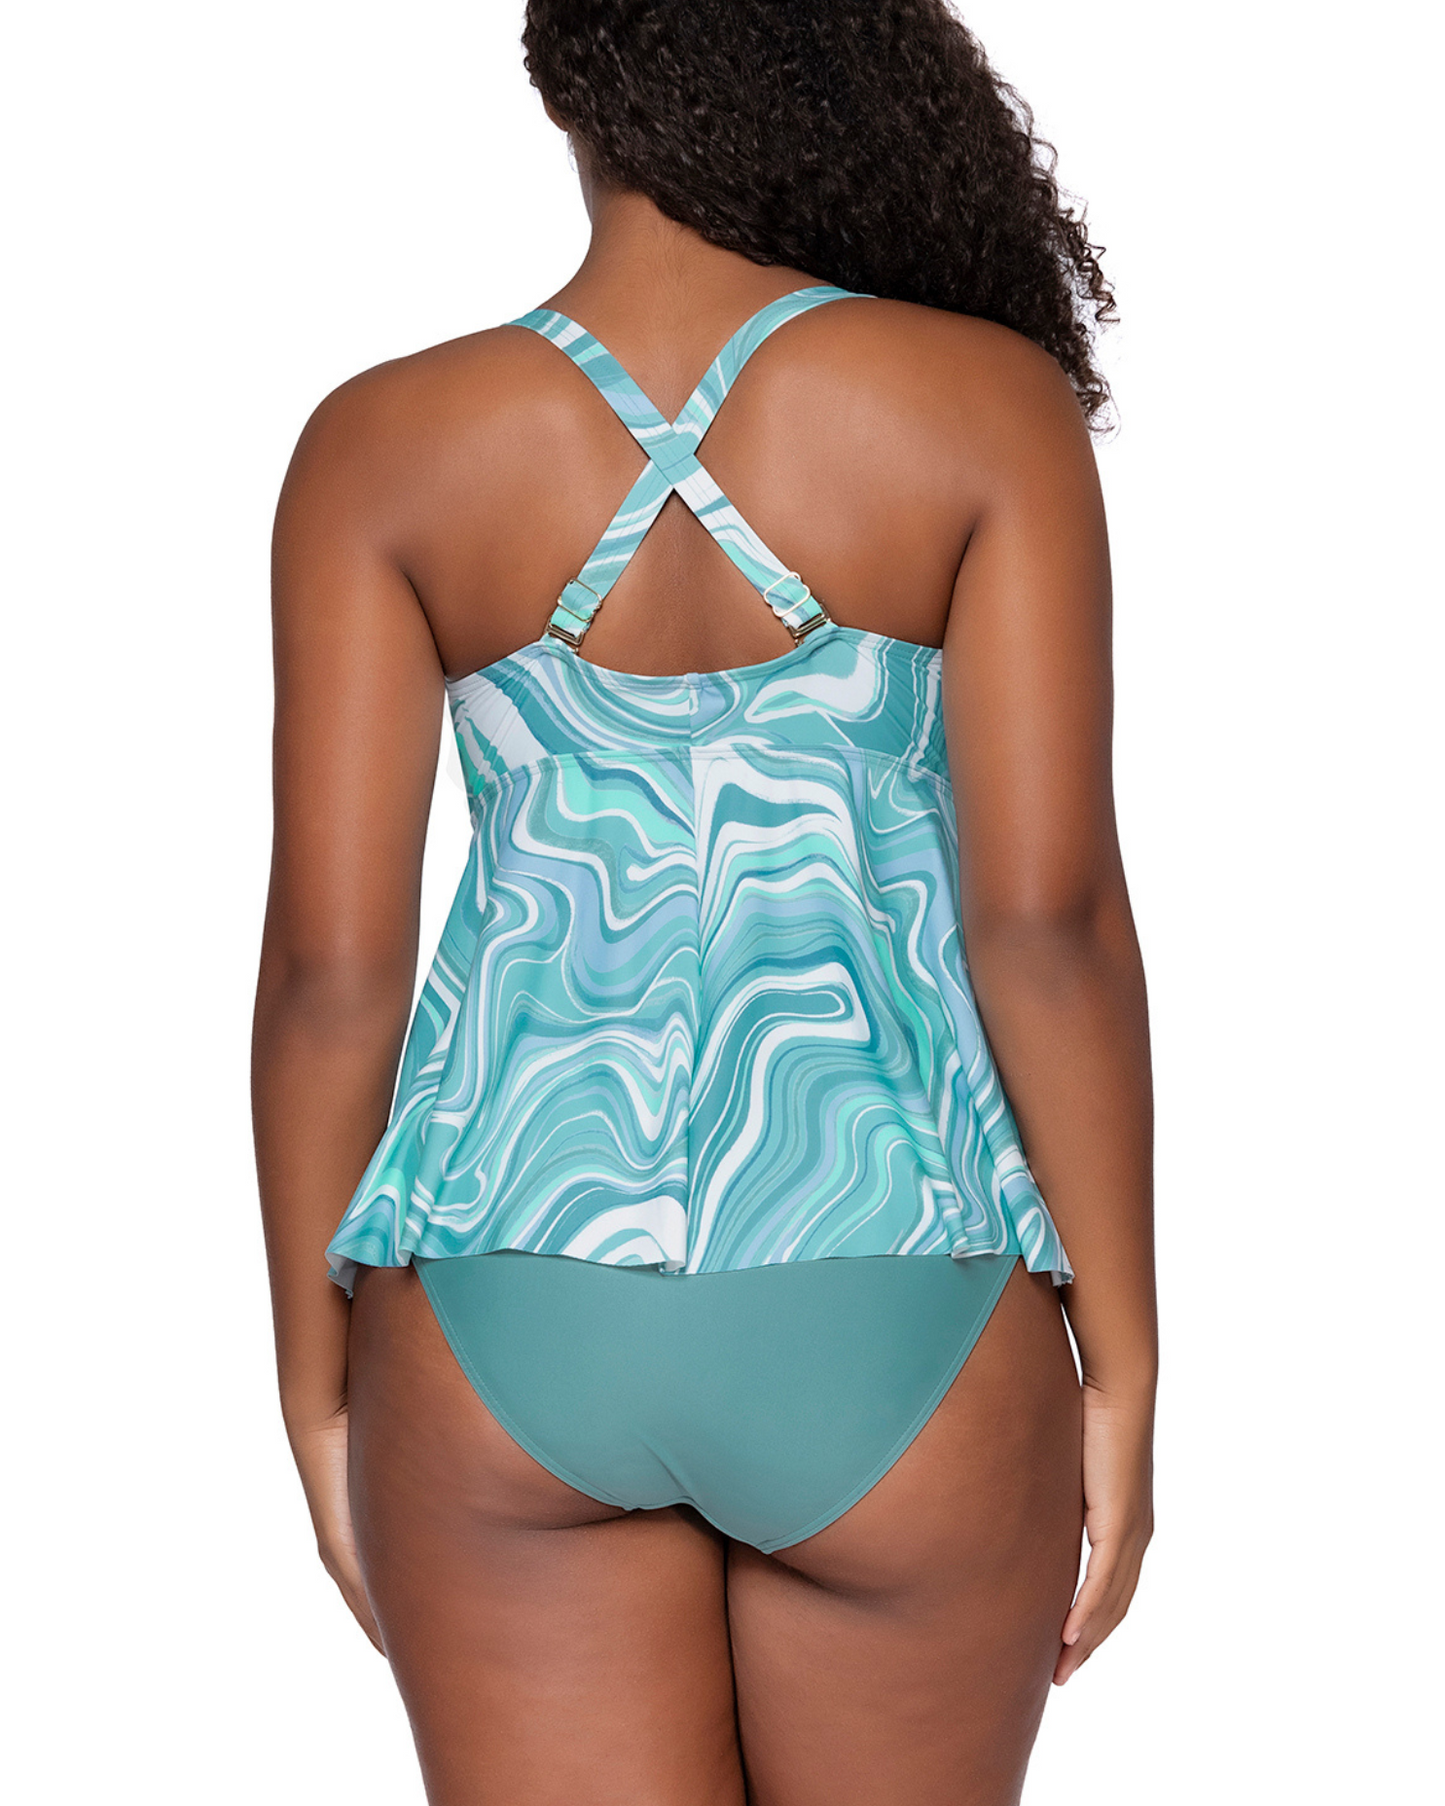 Model wearing a babydoll style tankini with hidden underwire in a pale turquoise and white swirl print 